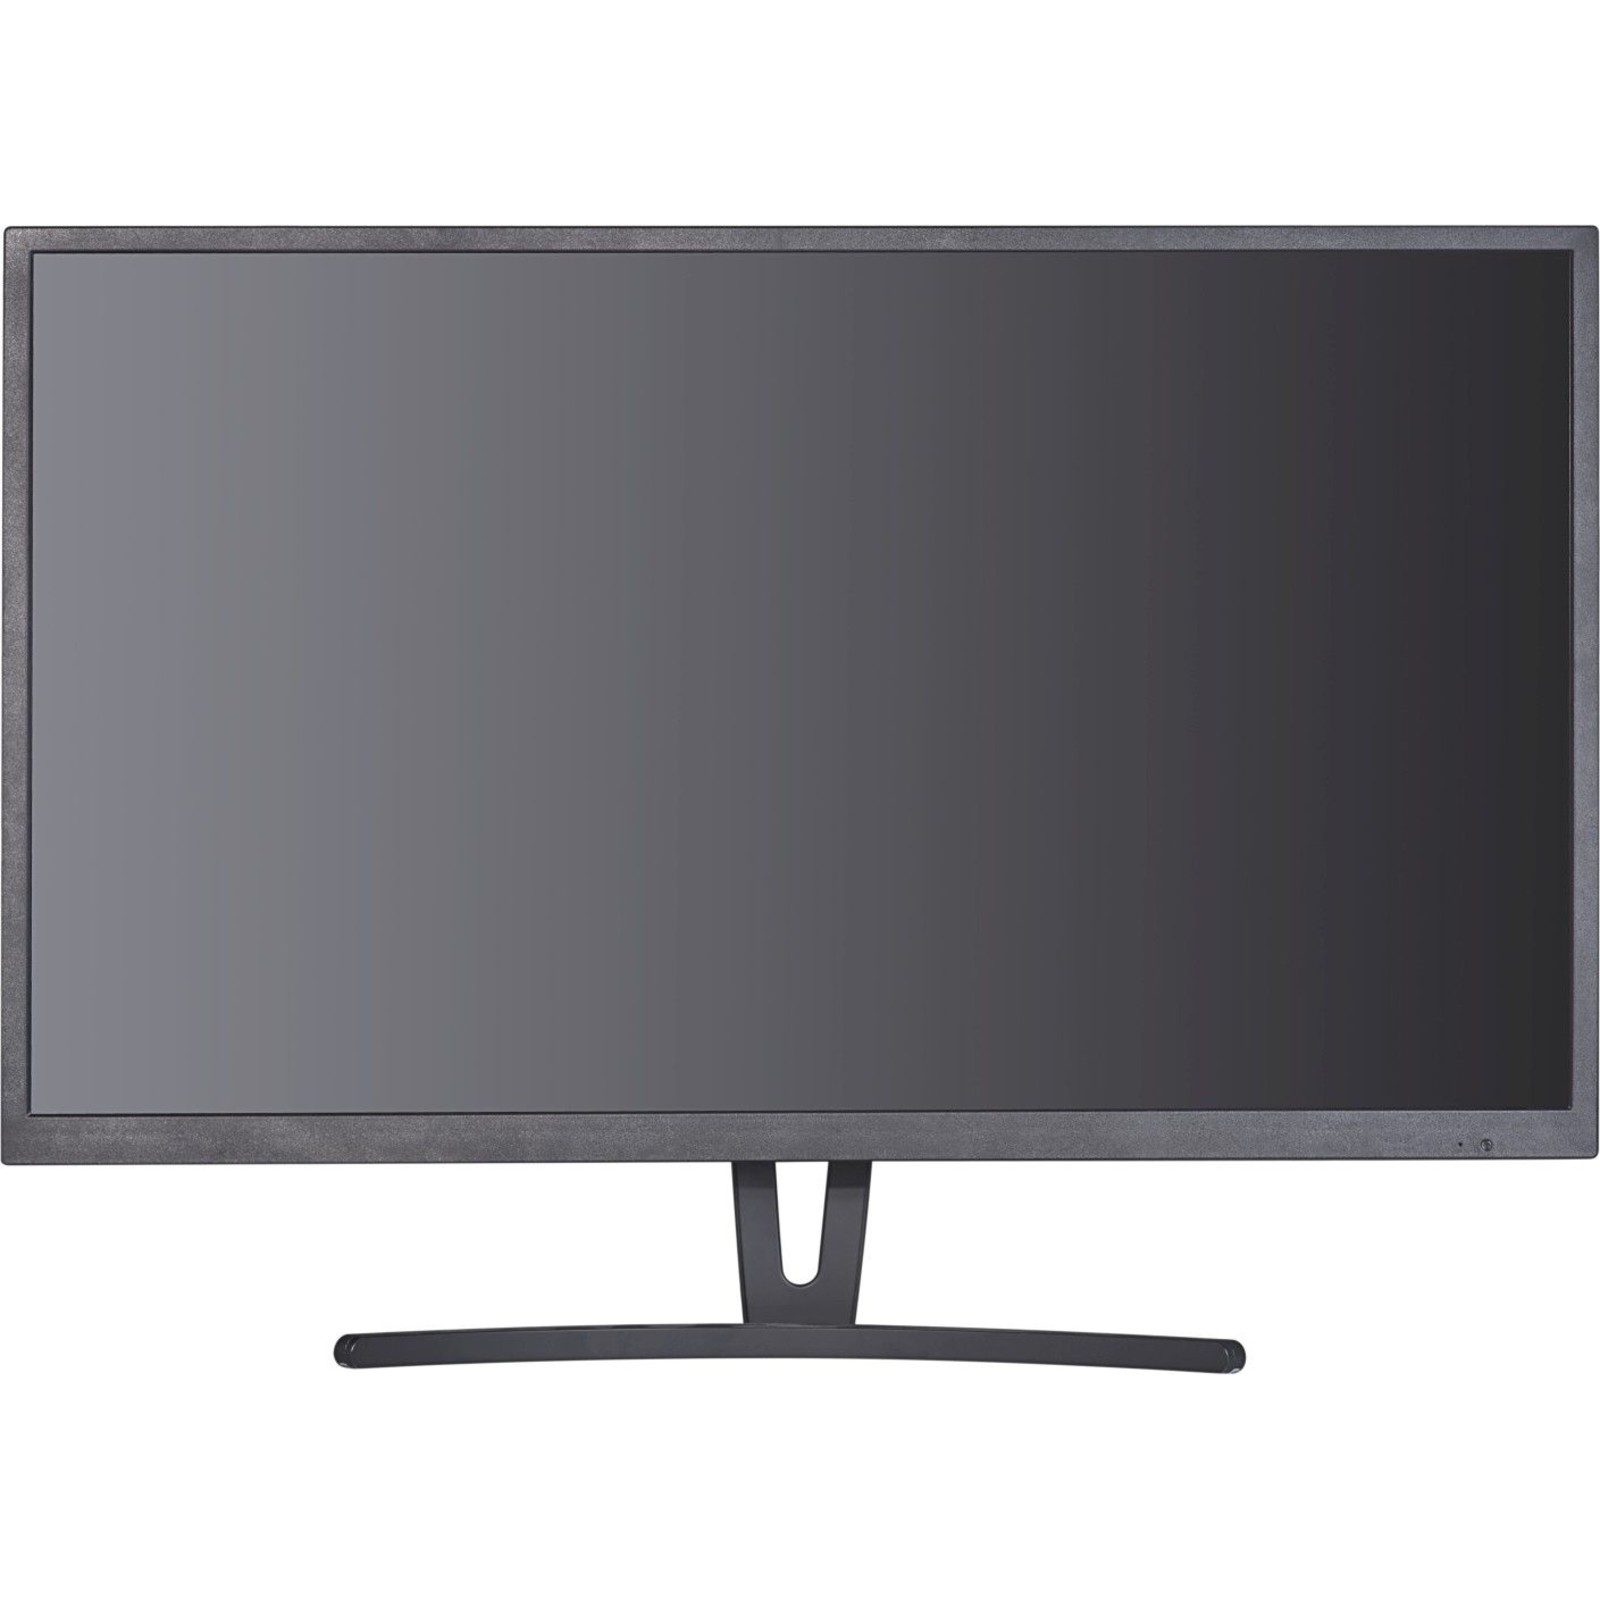 Hikvision DS-5032FC-A Hikvision DS-5032FC-A 31.5in Monitor